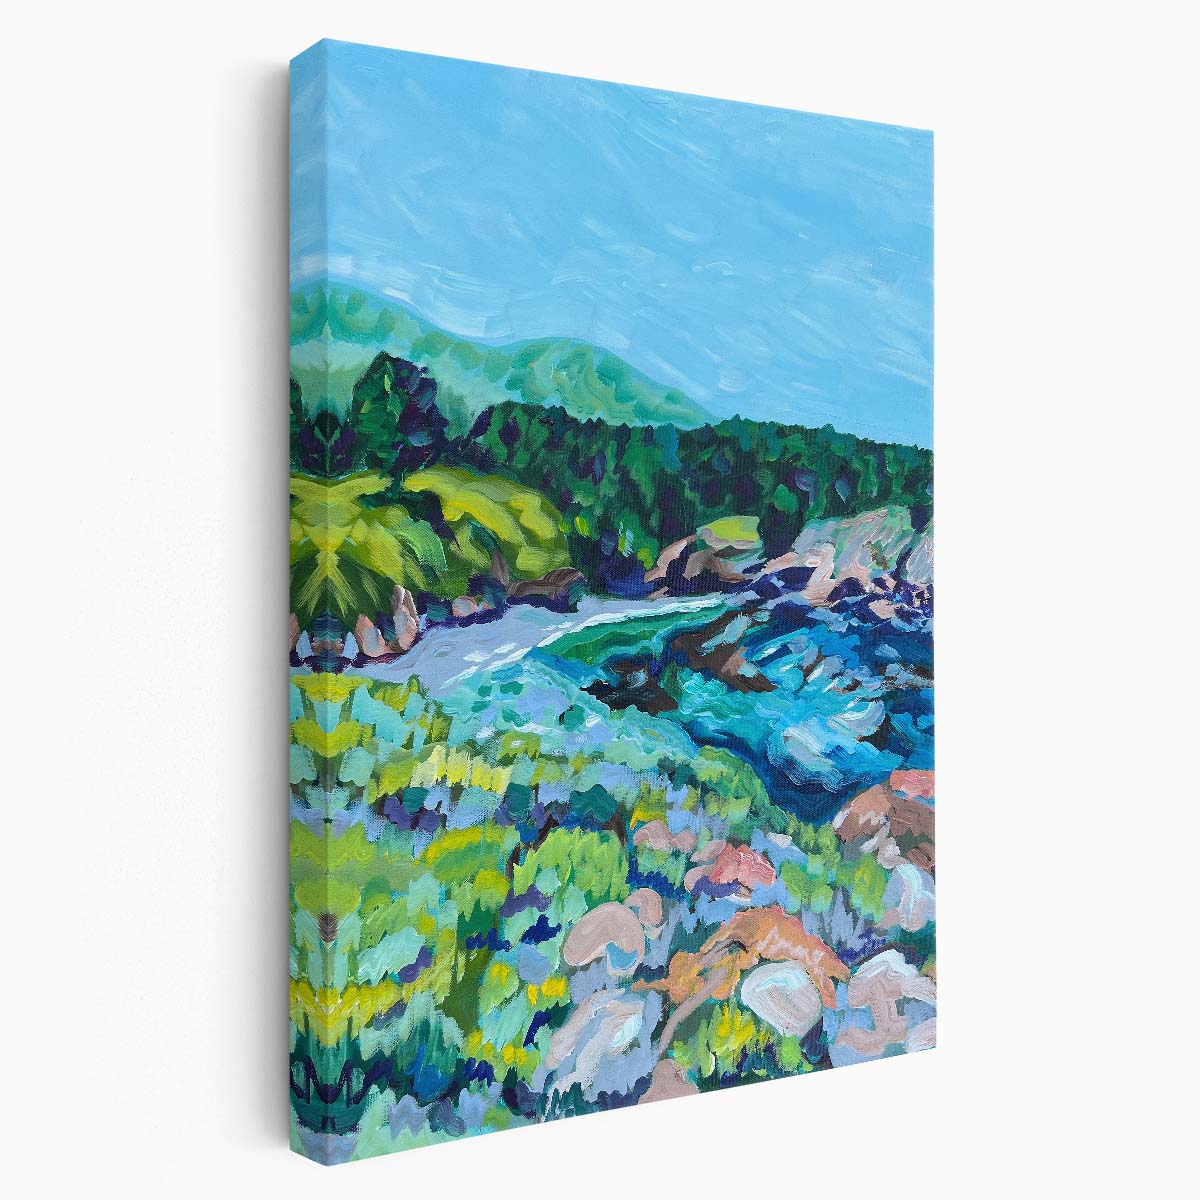 Illustrated Point Lobos Park Vibrant Seascape Acrylic Wall Art by Luxuriance Designs, made in USA